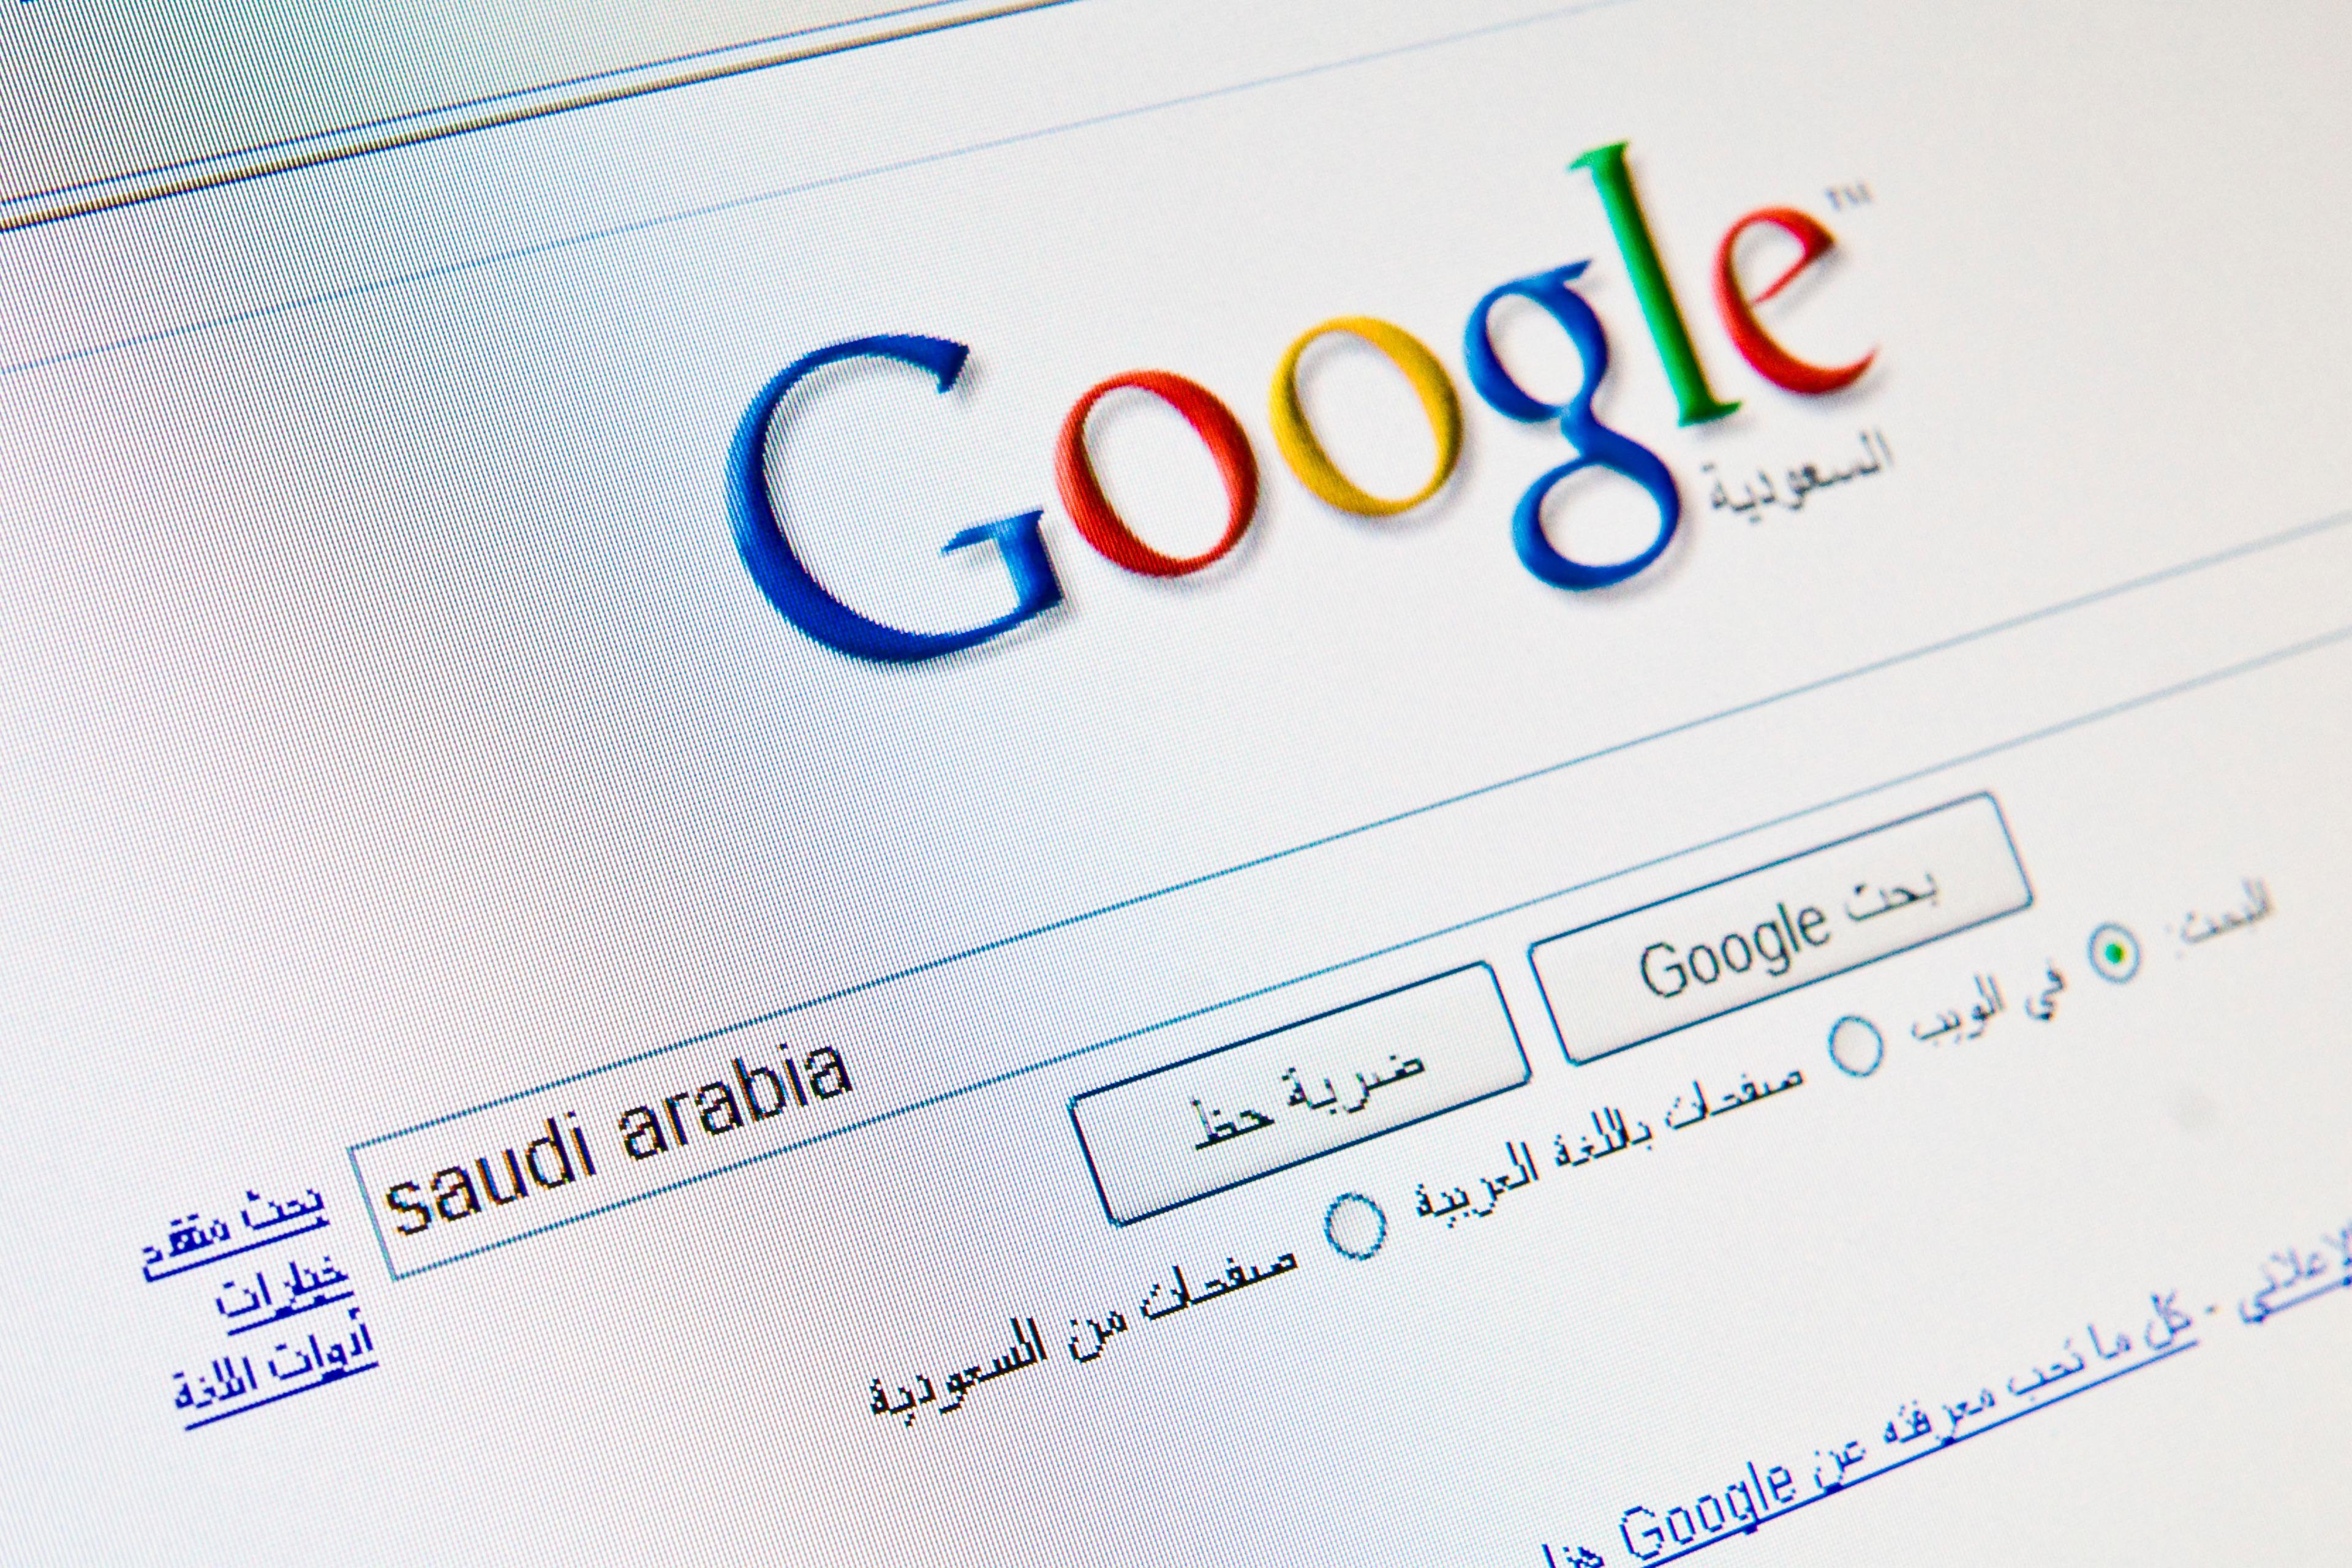 Saudi Arabia Arms Public Sector With Google Cloud Services